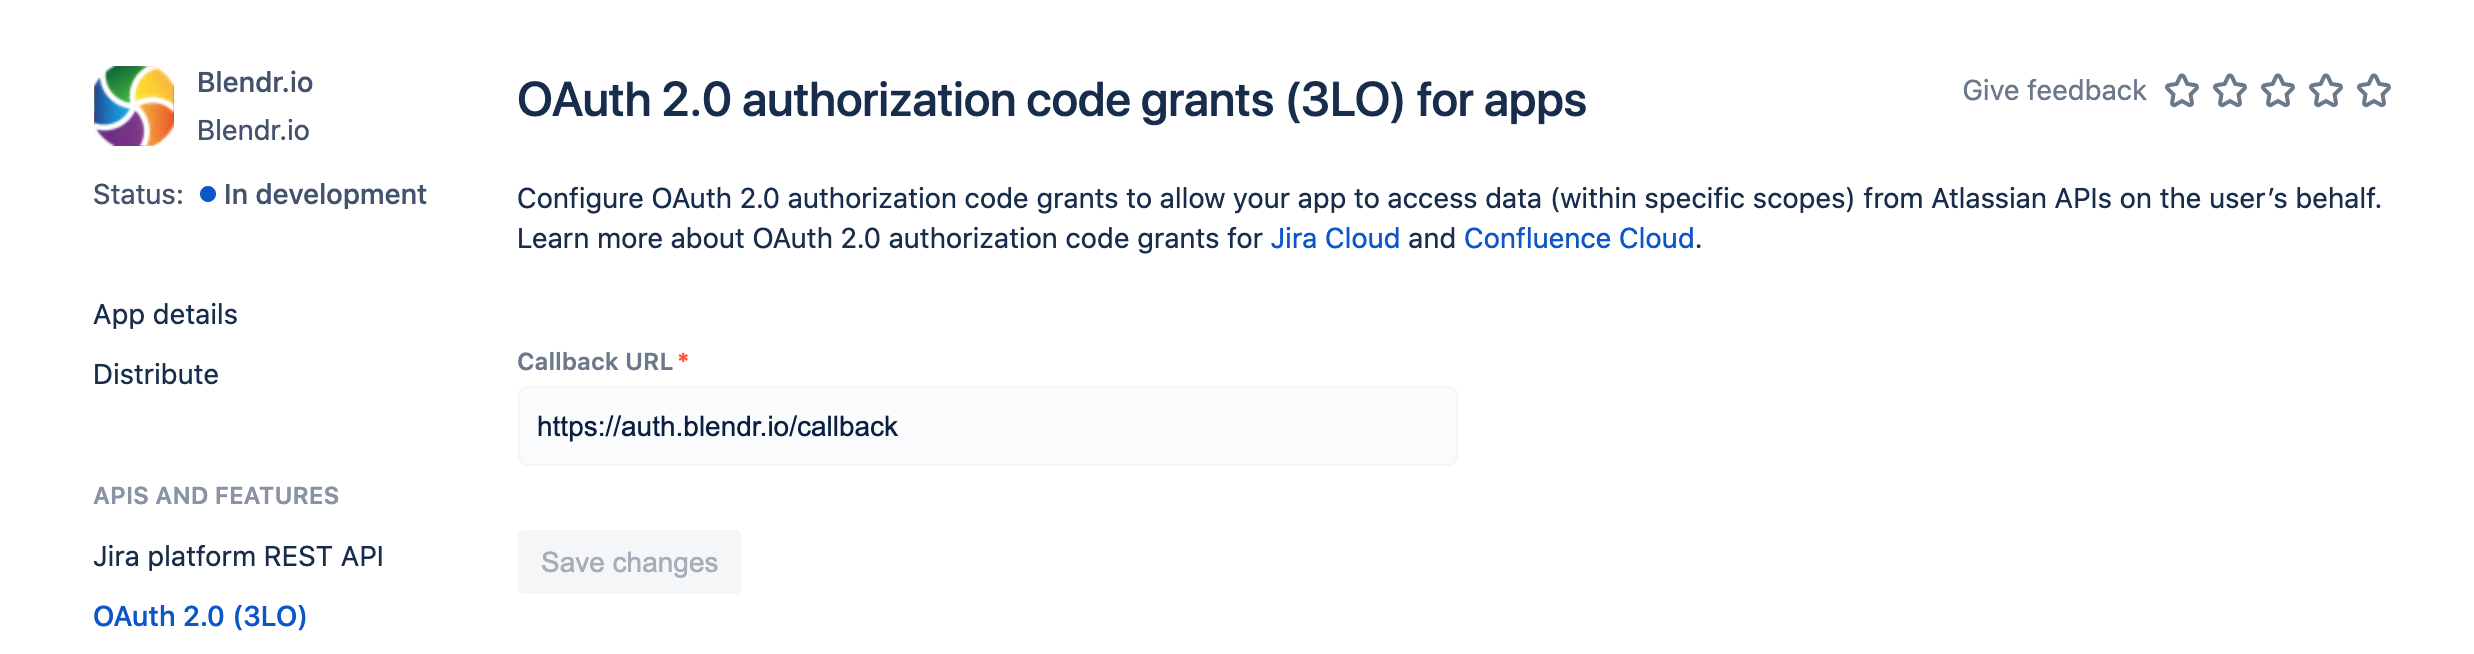 OAuth 2.0 authorization code grants (3LO) for apps.